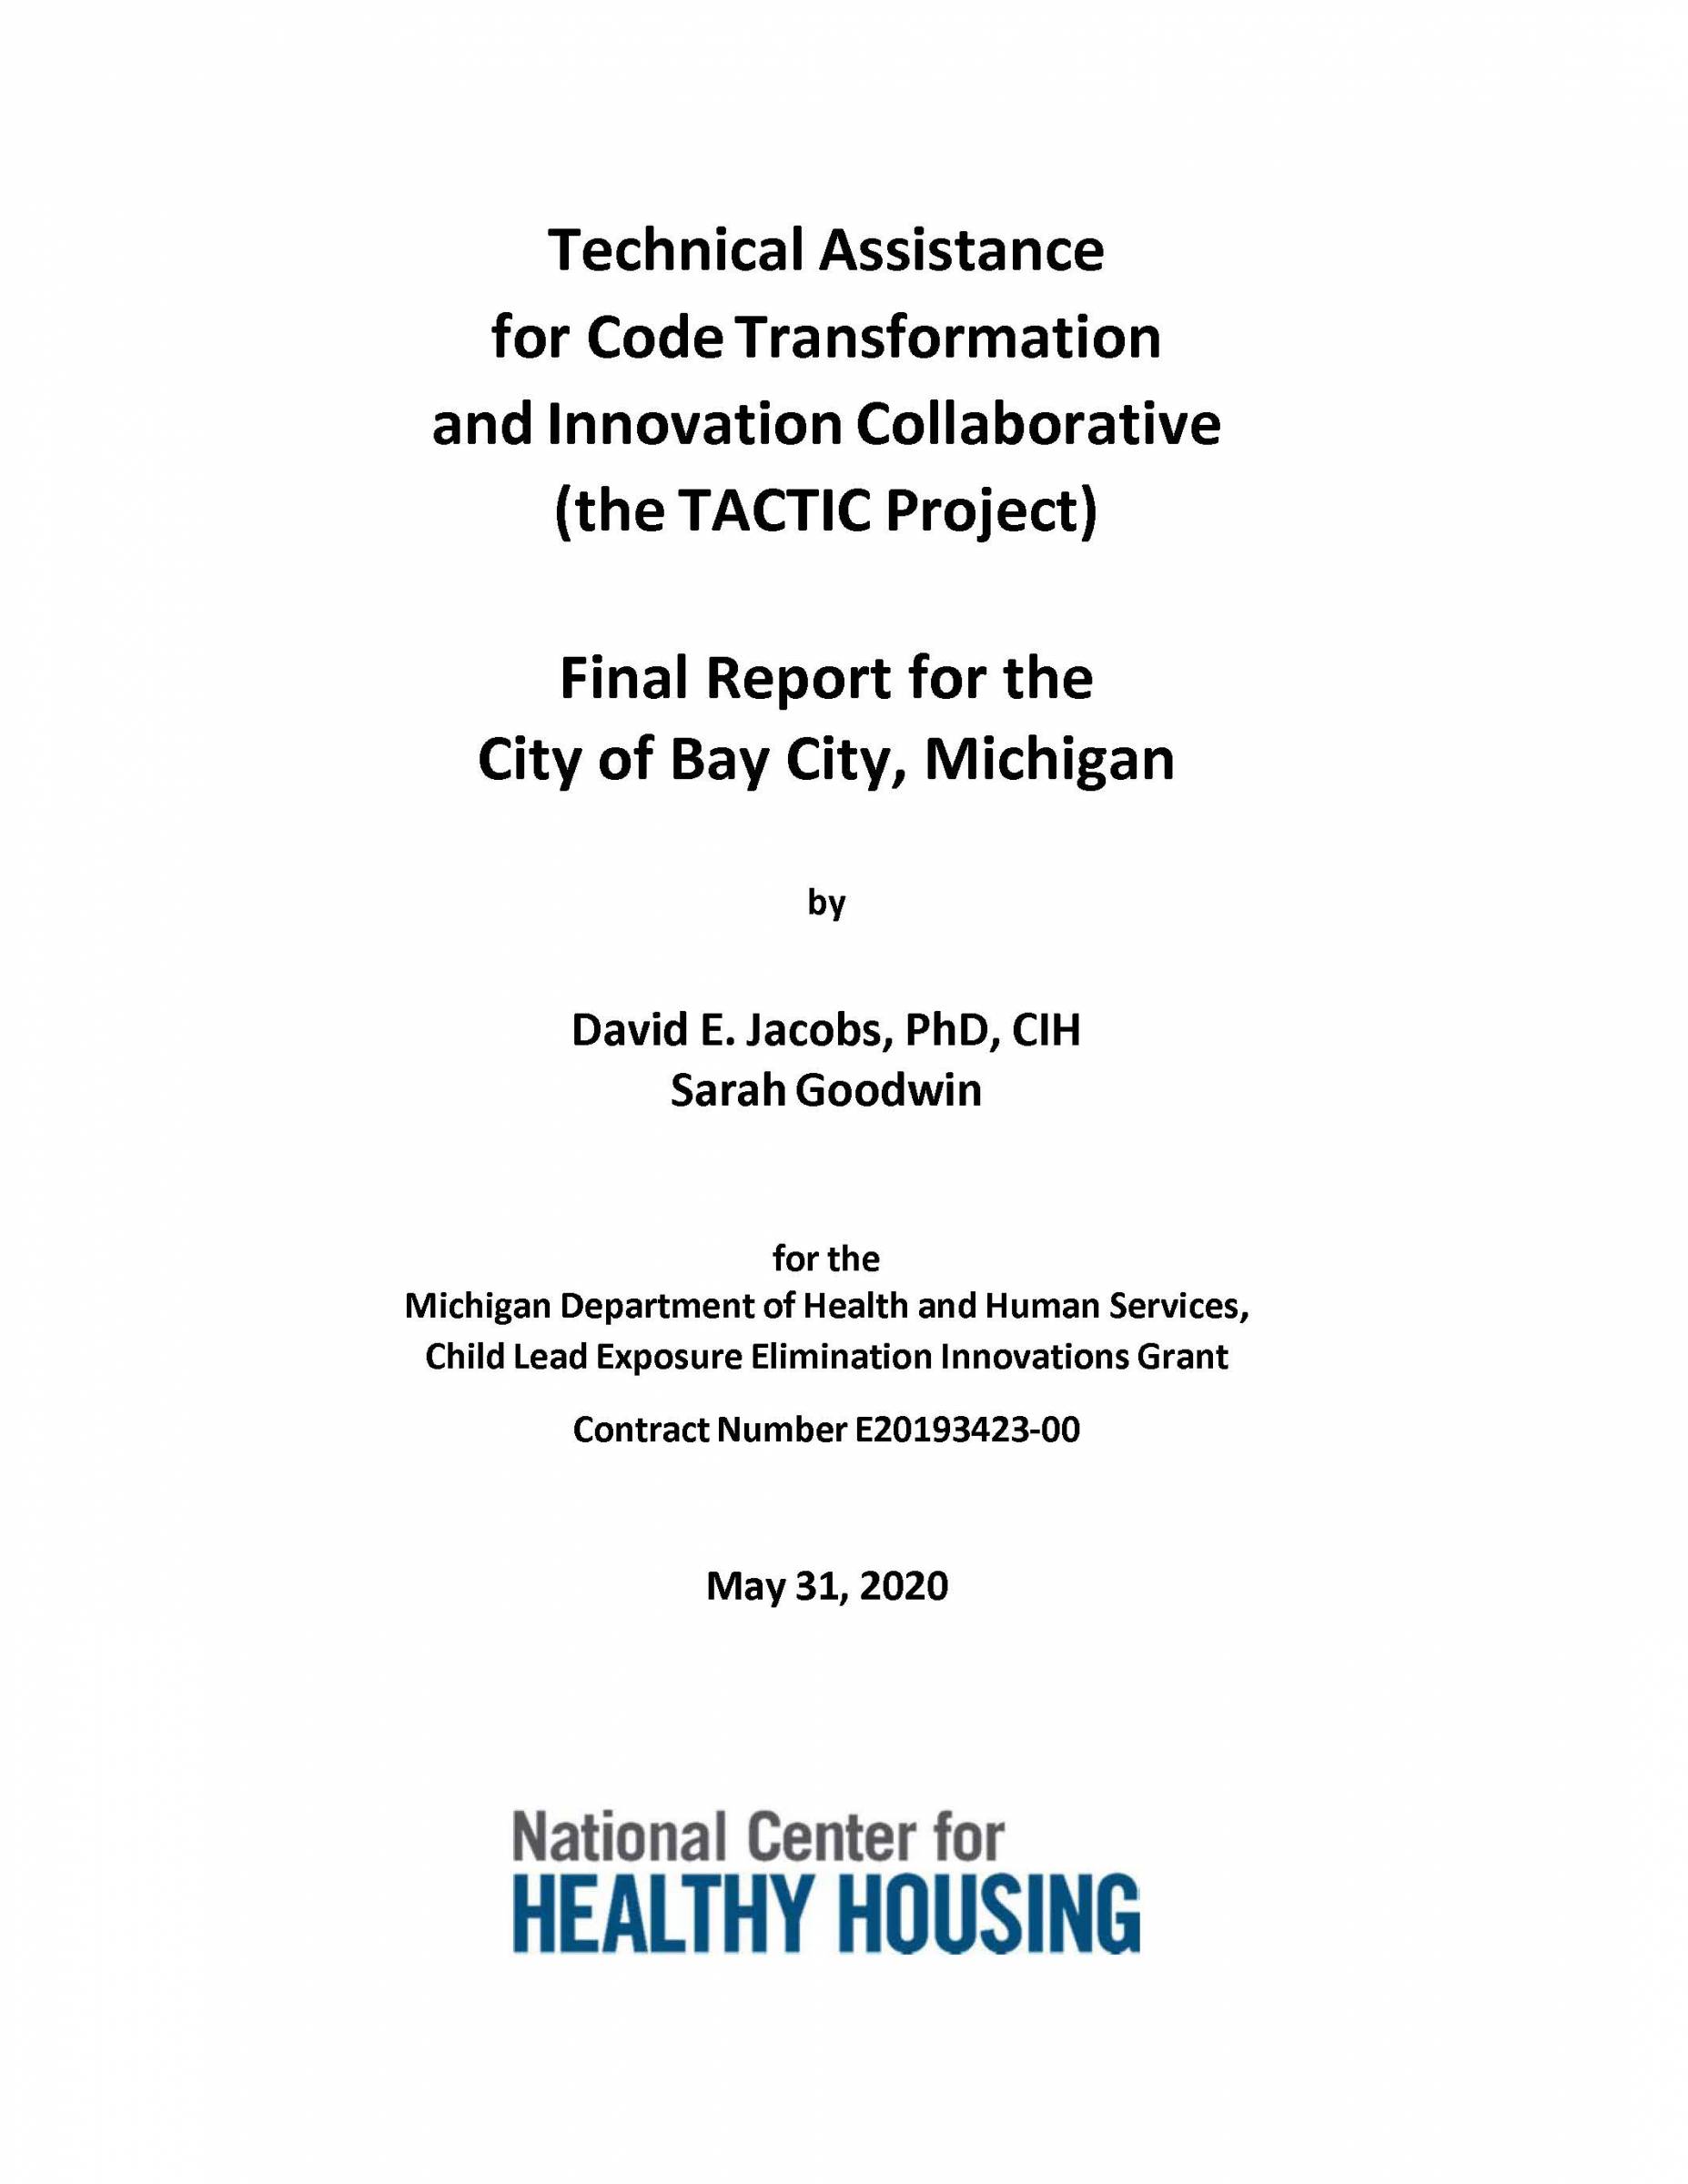 The TACTIC Project - Final Report for the City of Bay City, Michigan